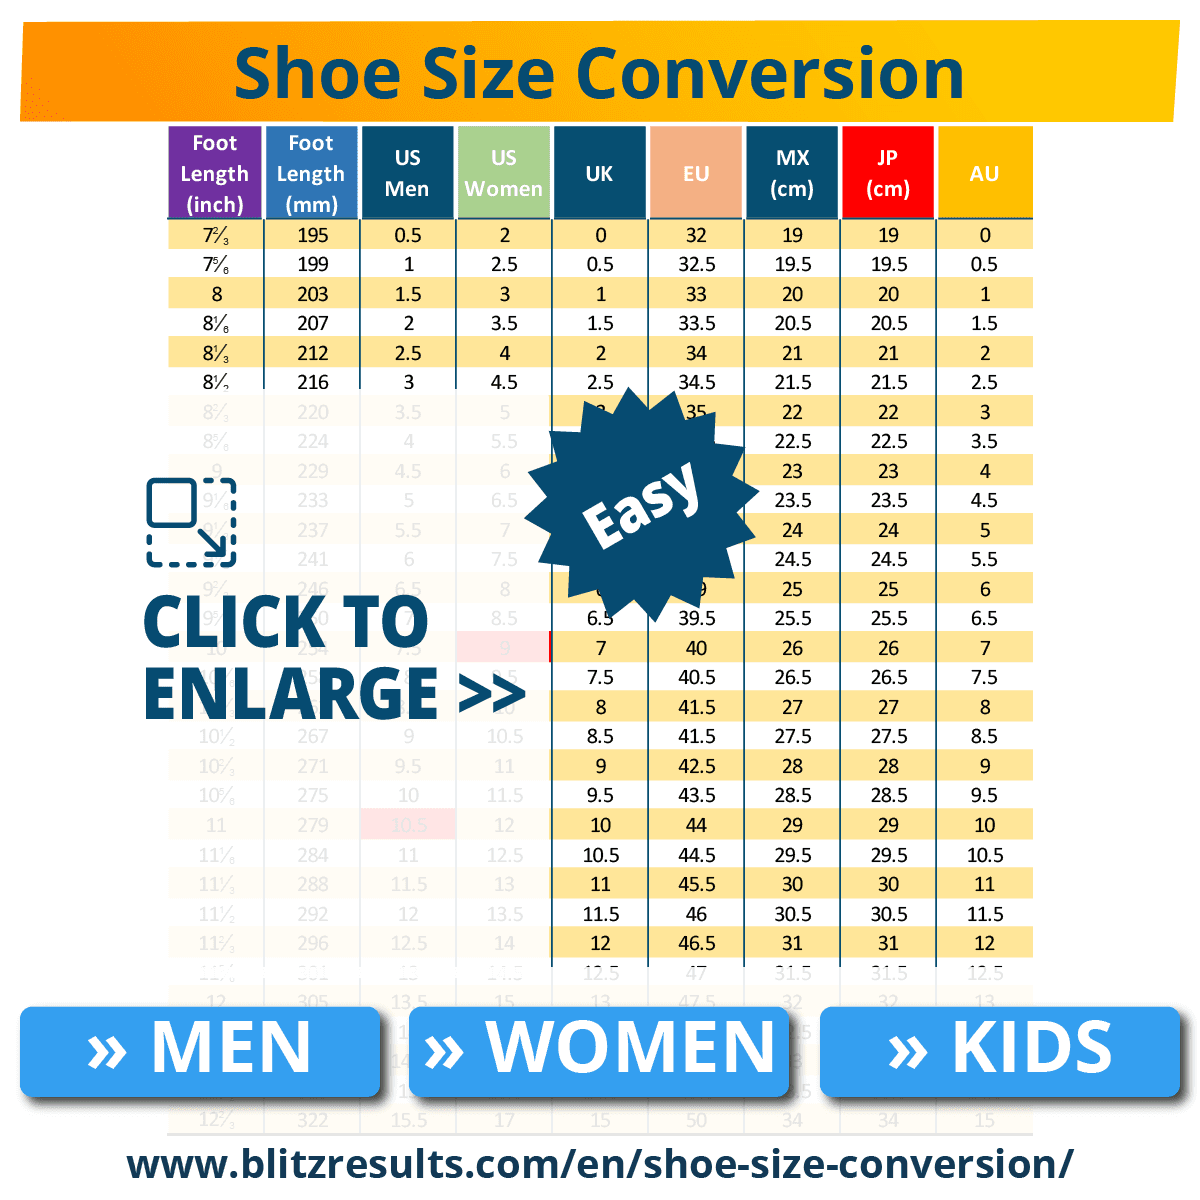 childrens size 10 shoes in eu